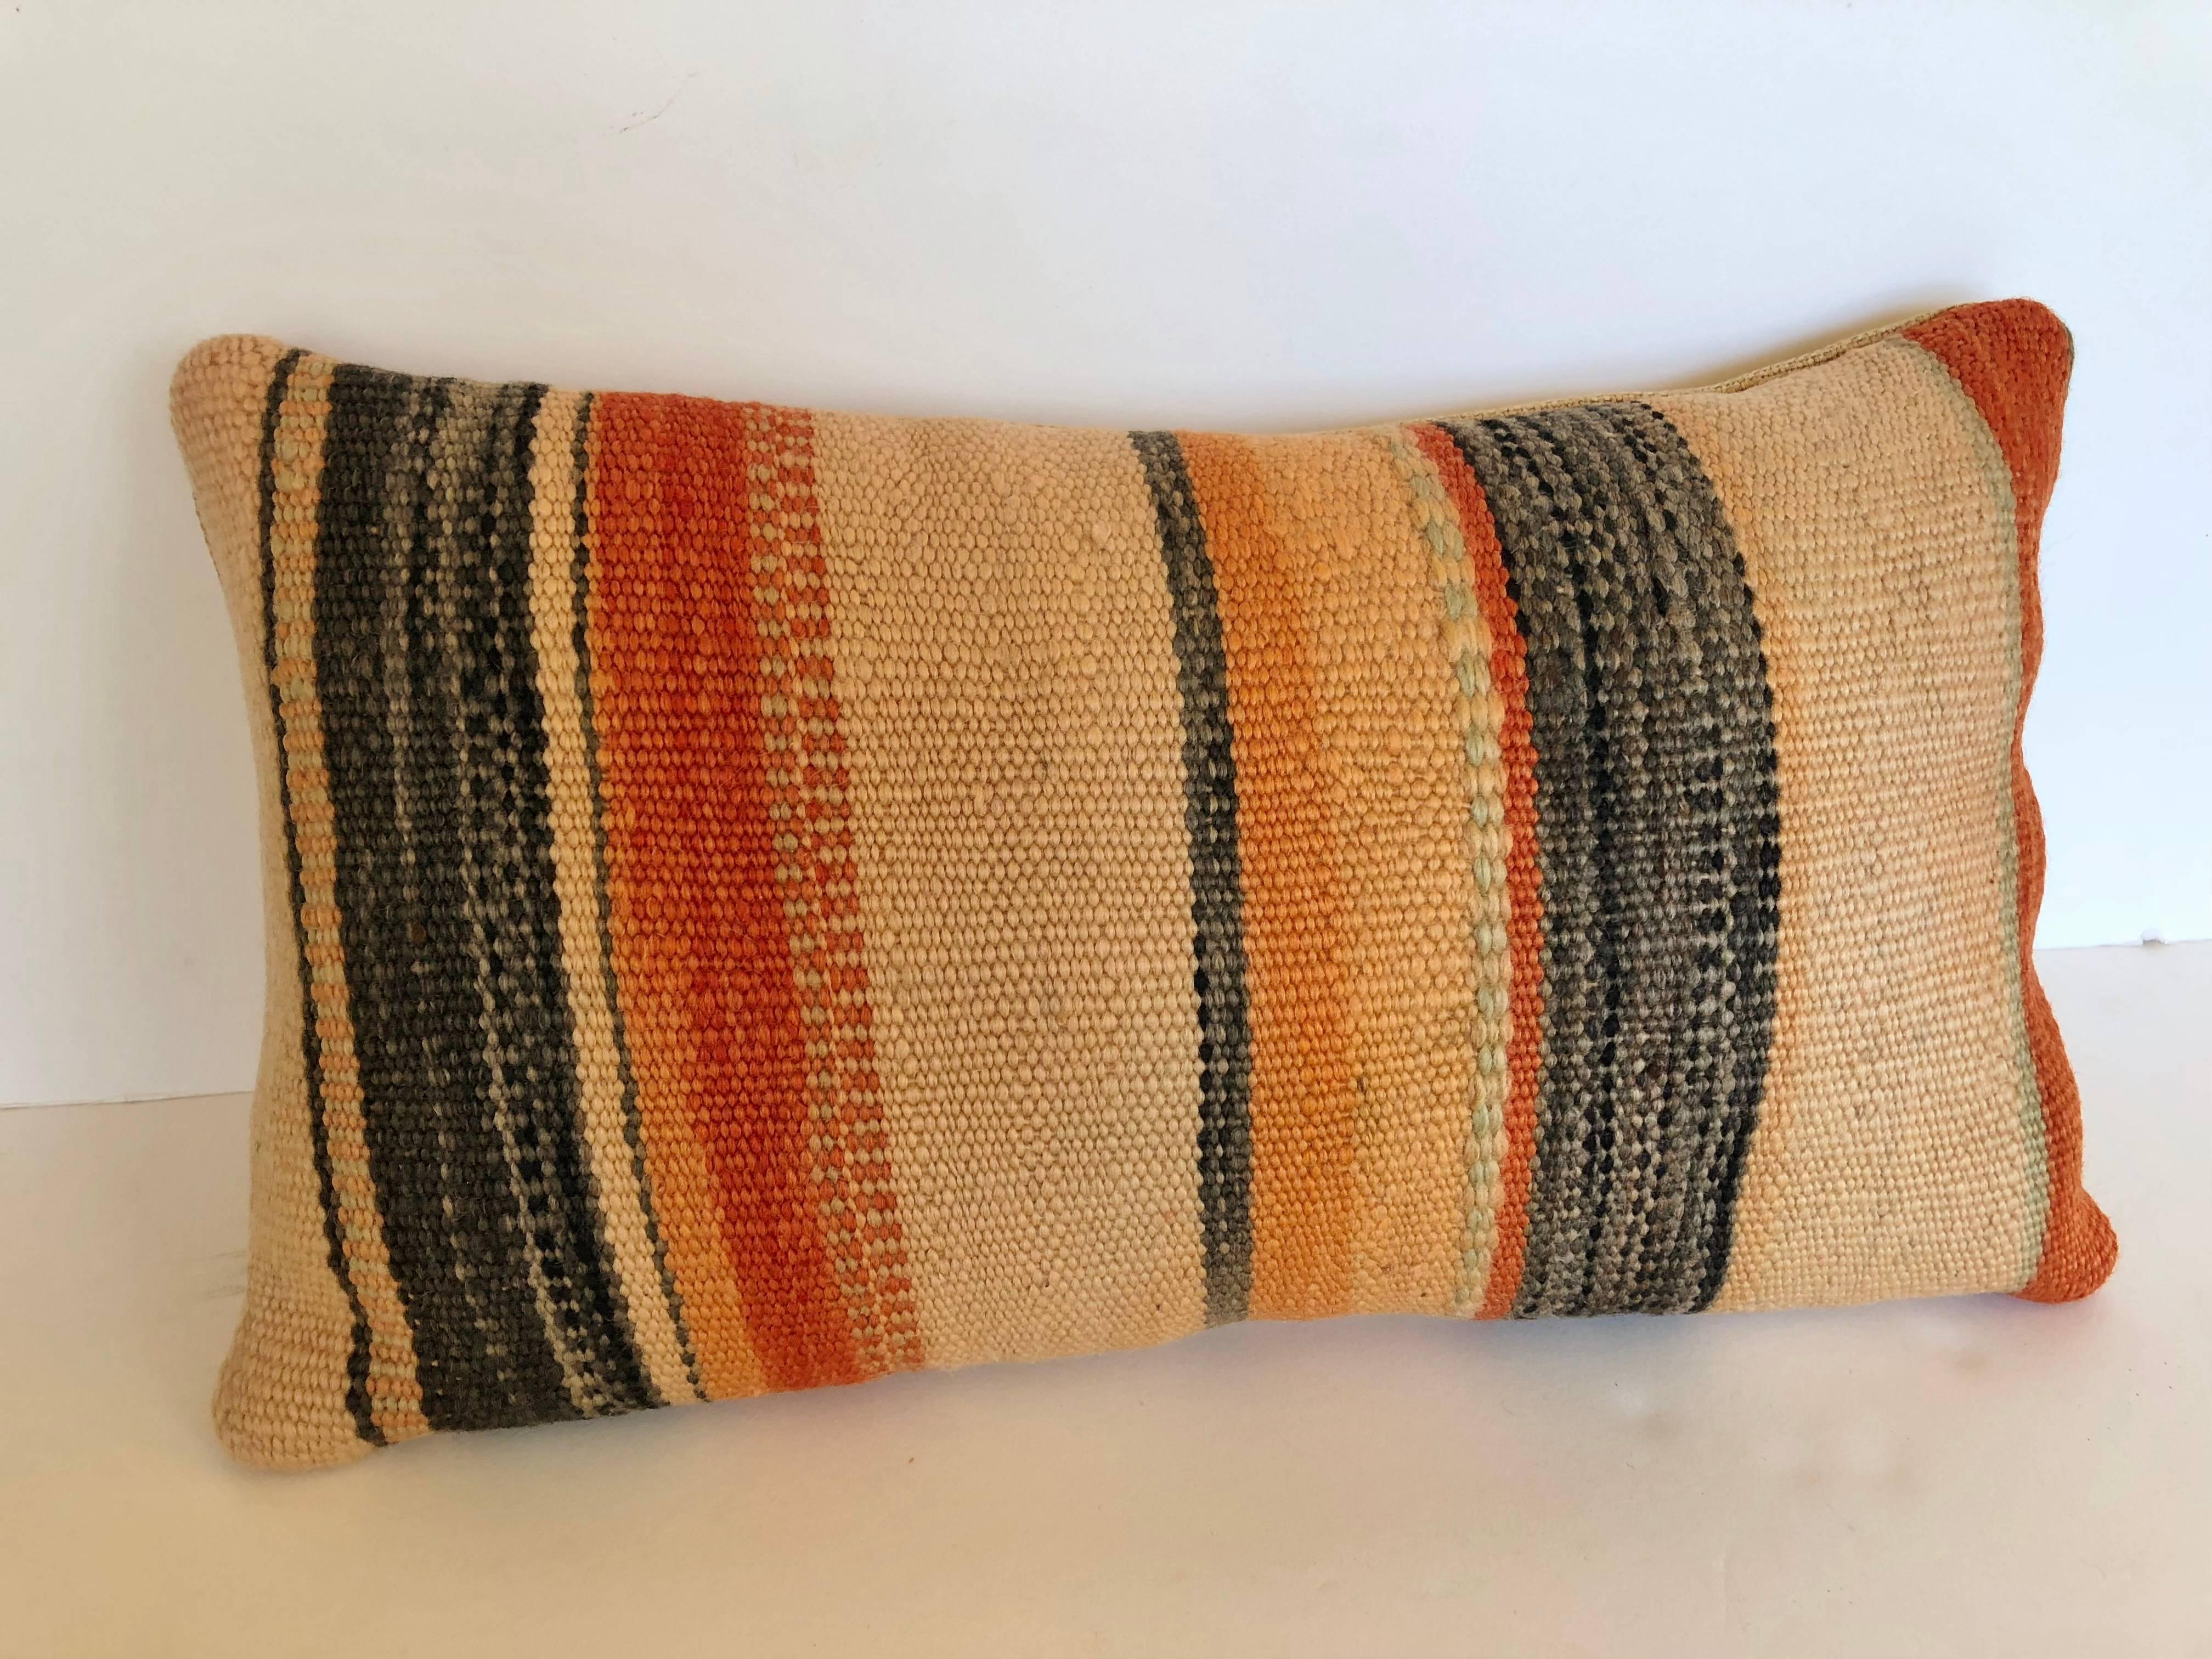 Custom pillows cut from a vintage hand loomed wool Moroccan Berber rug from the Atlas Mountains. Wool is soft and lustrous with all natural colors. Pillows are backed in linen, filled with an insert of 50/50 down and feathers and hand sewn closed.